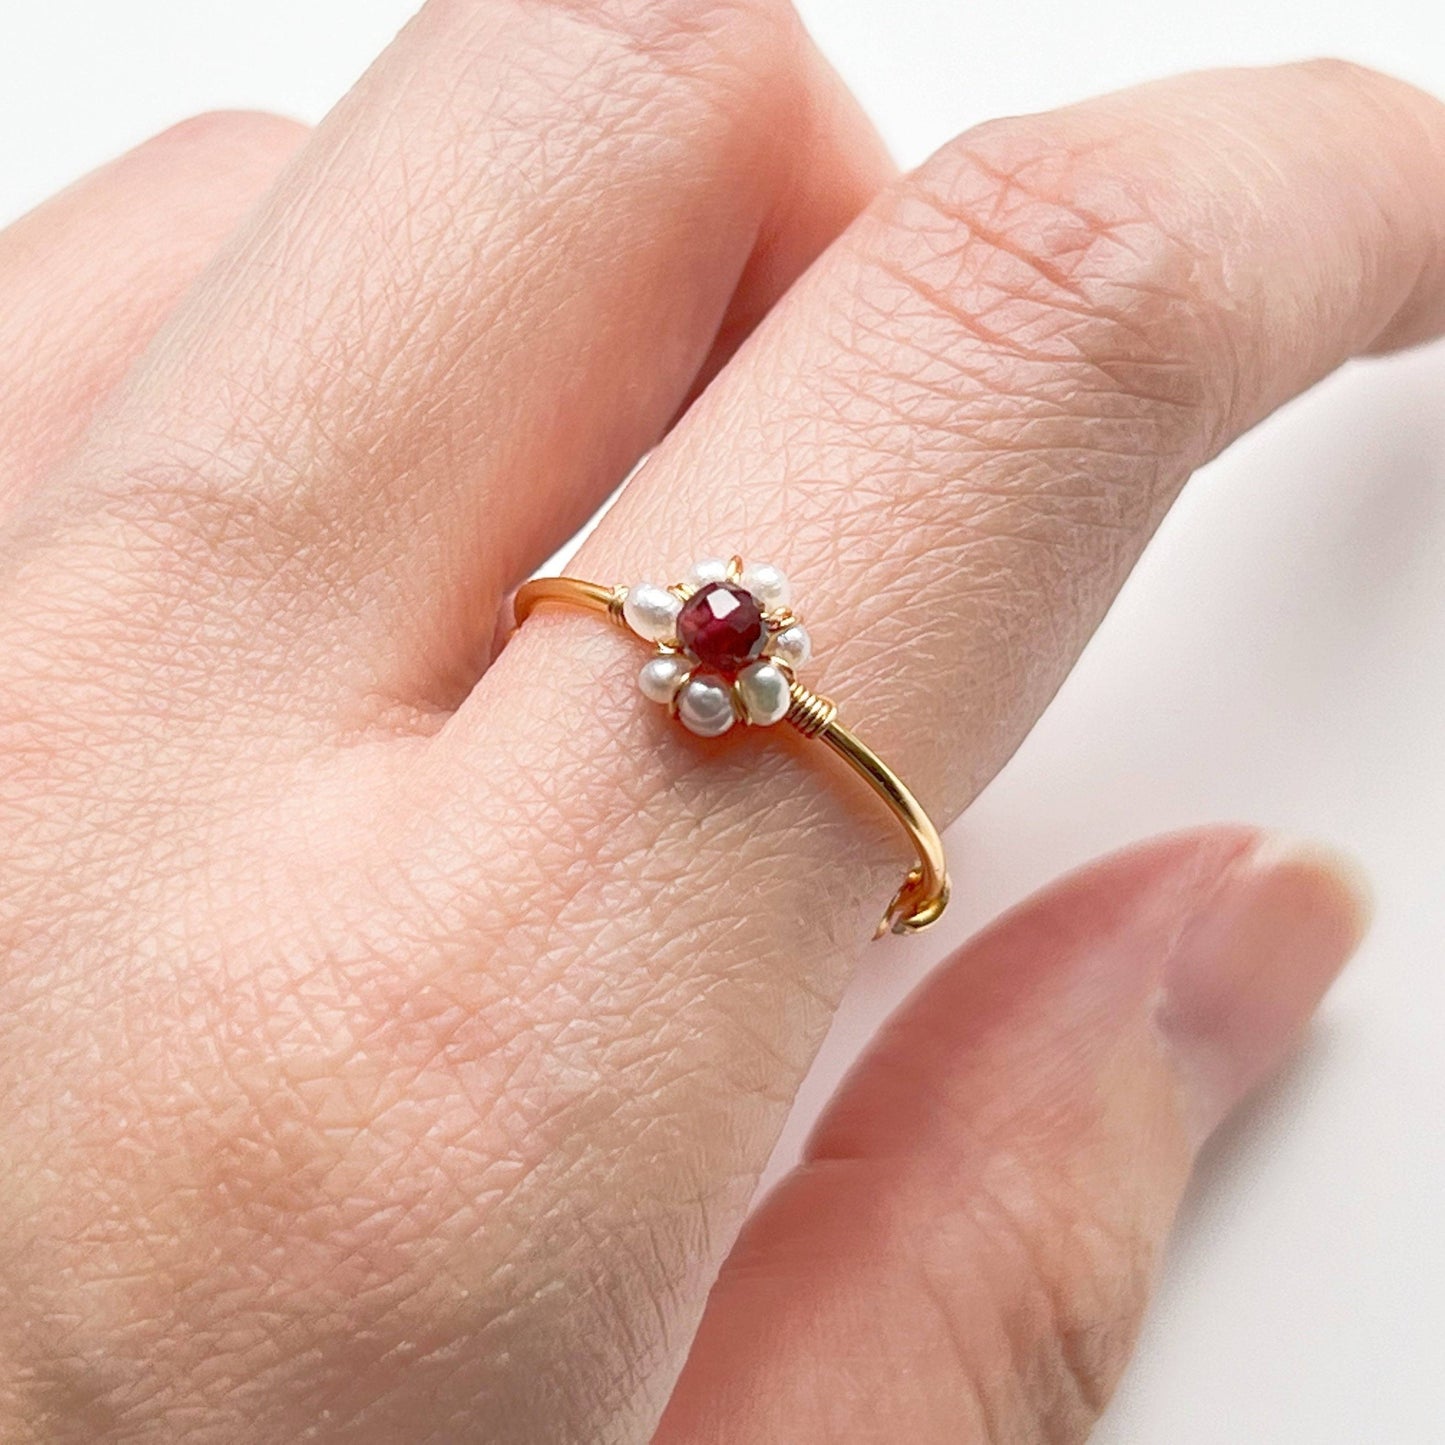 Garnet and Pearl Beads Ring - Red Gemstone Adjustable Ring - January Birthstone-Ninaouity